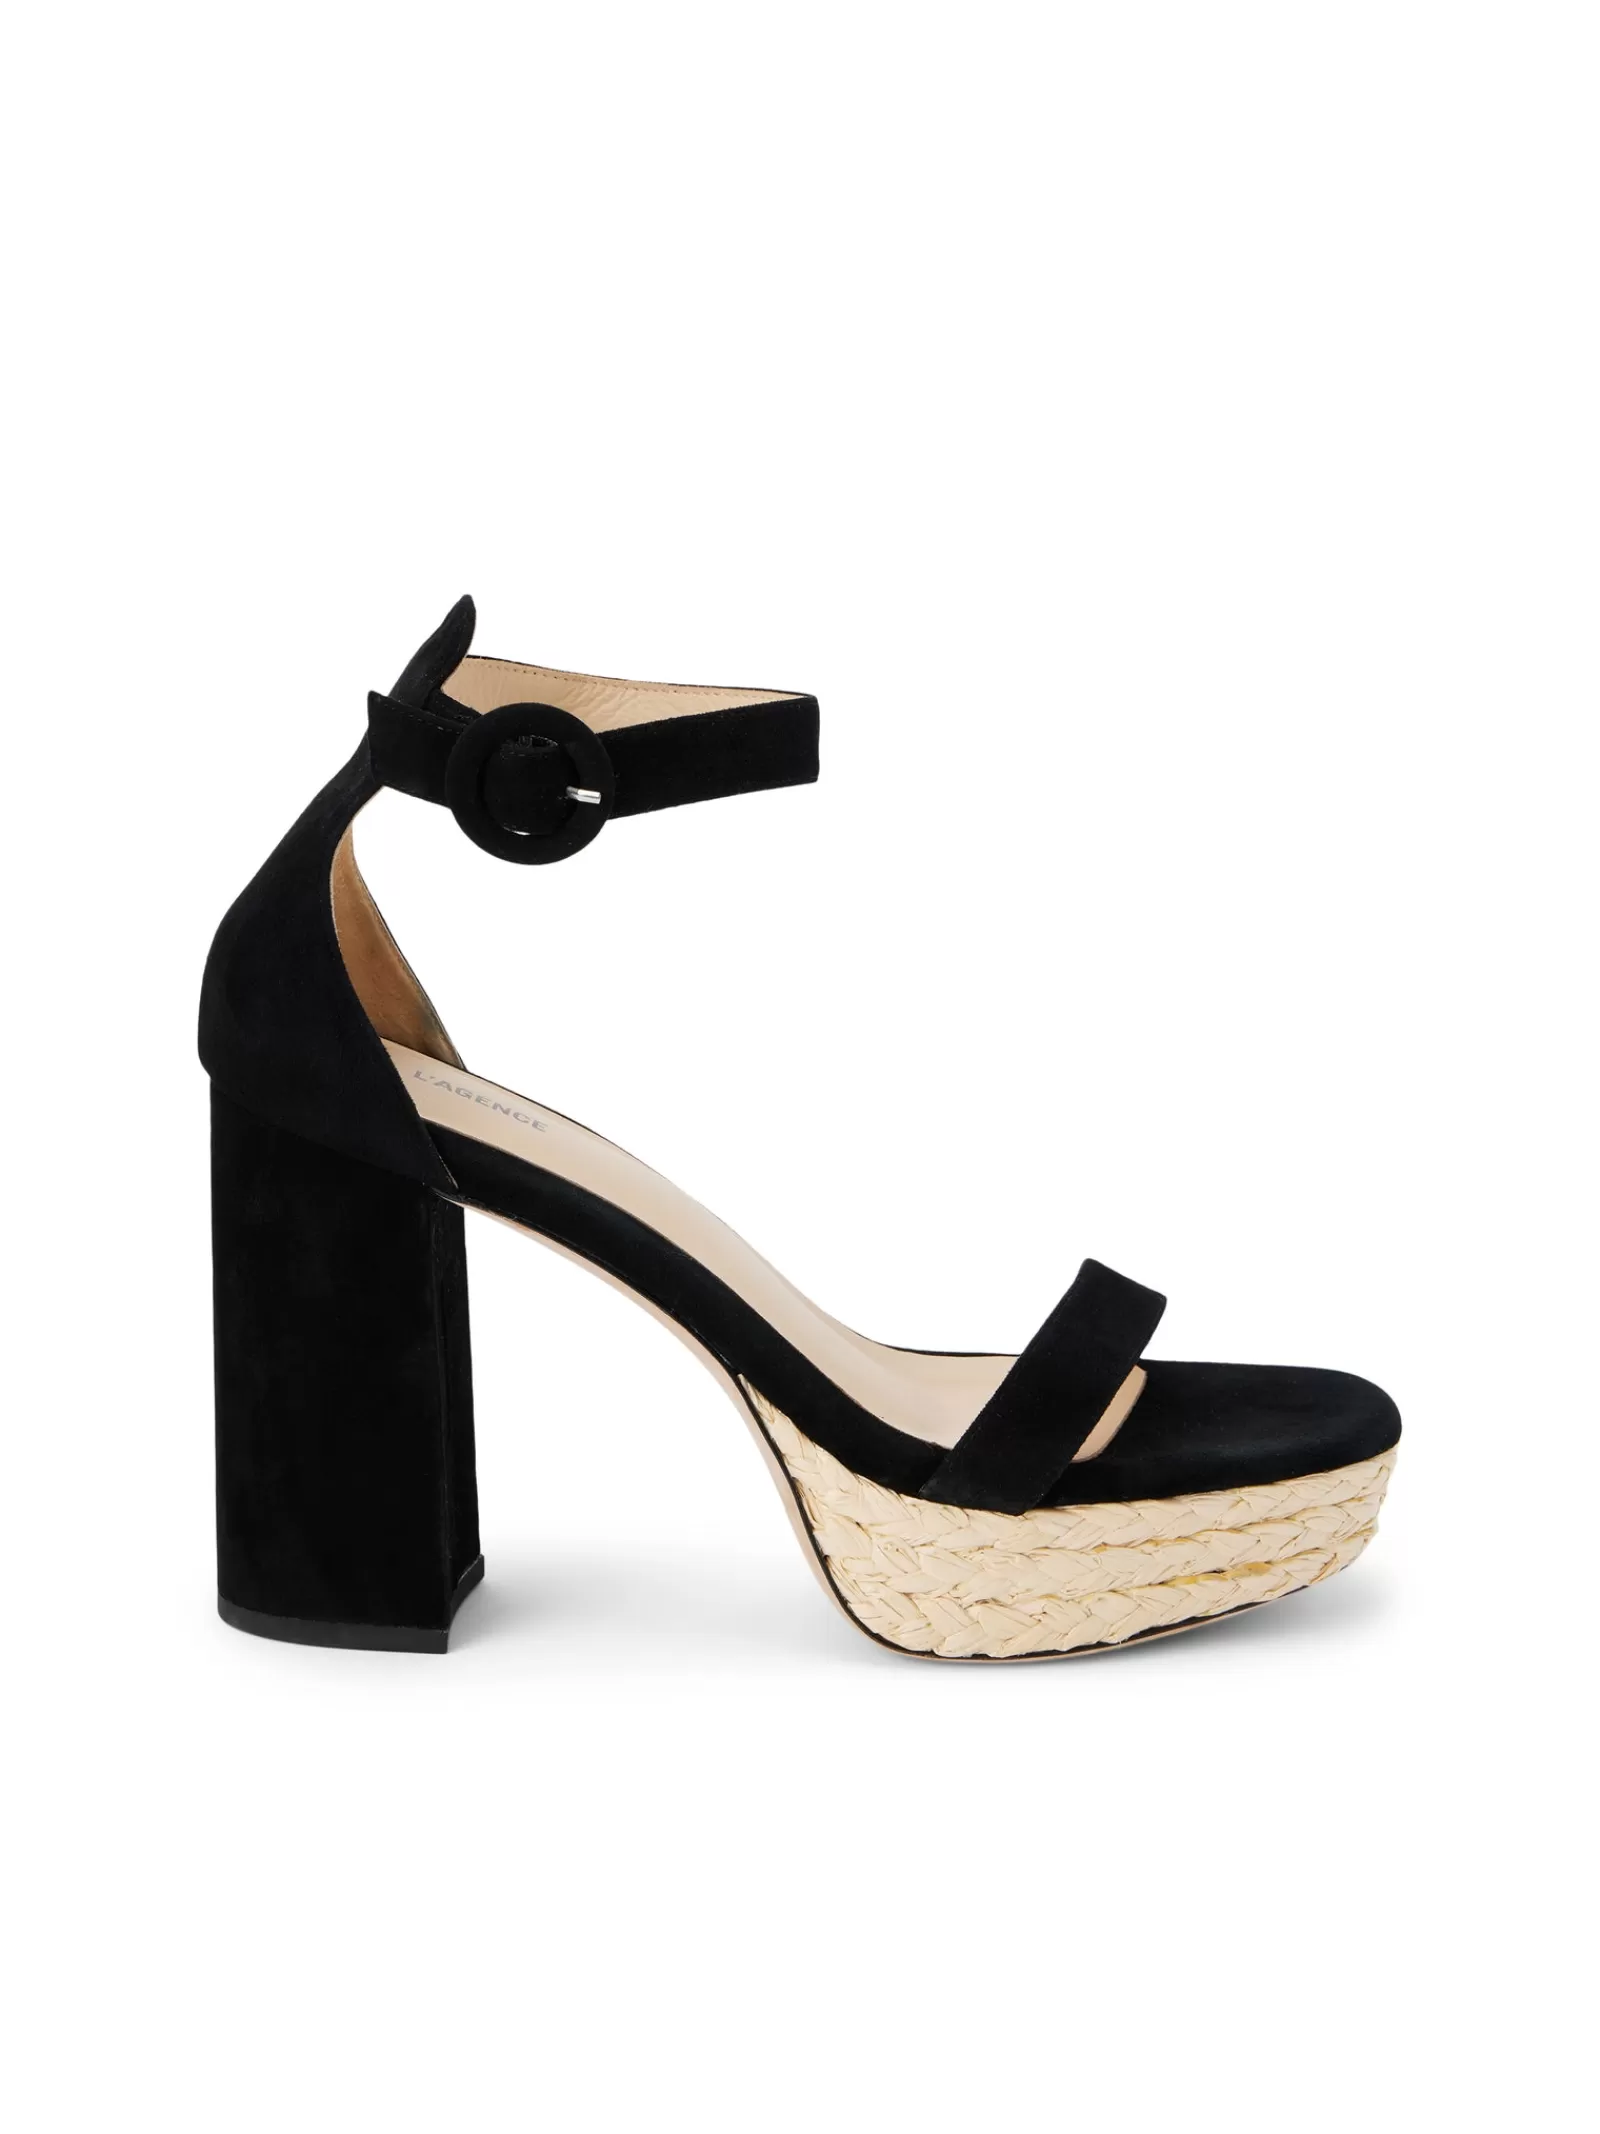 L'AGENCE Avia Suede Platform Sandal< All Things Black | Spring Collection